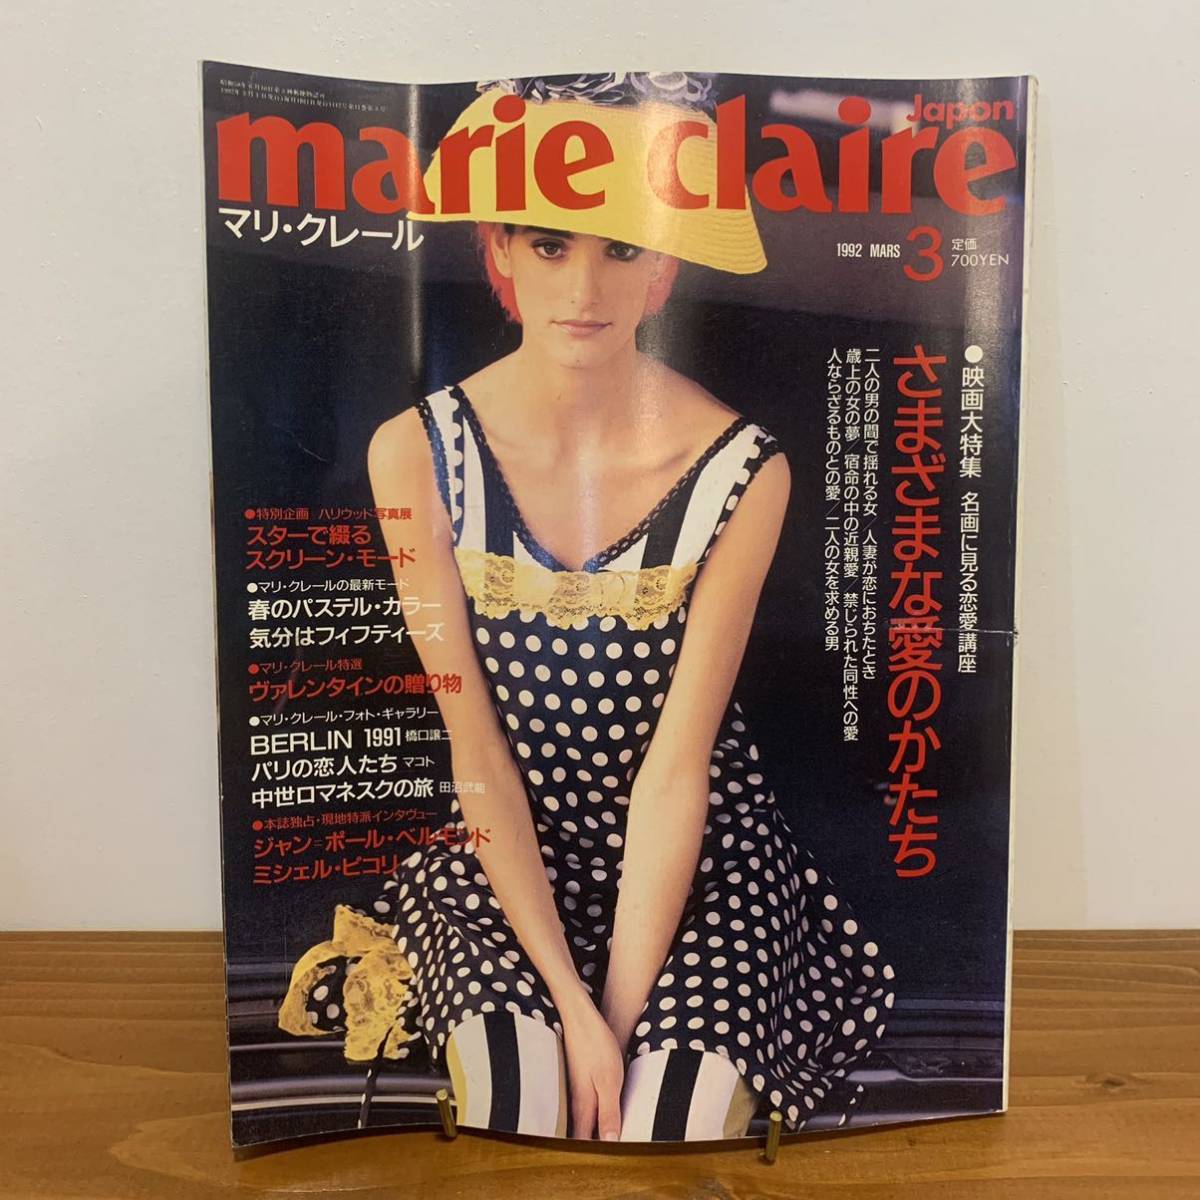 220901 Mali * clair Japan version 1992 year 3 month number *marie claire japon* movie large special collection various love. ...* retro fashion mode magazine 